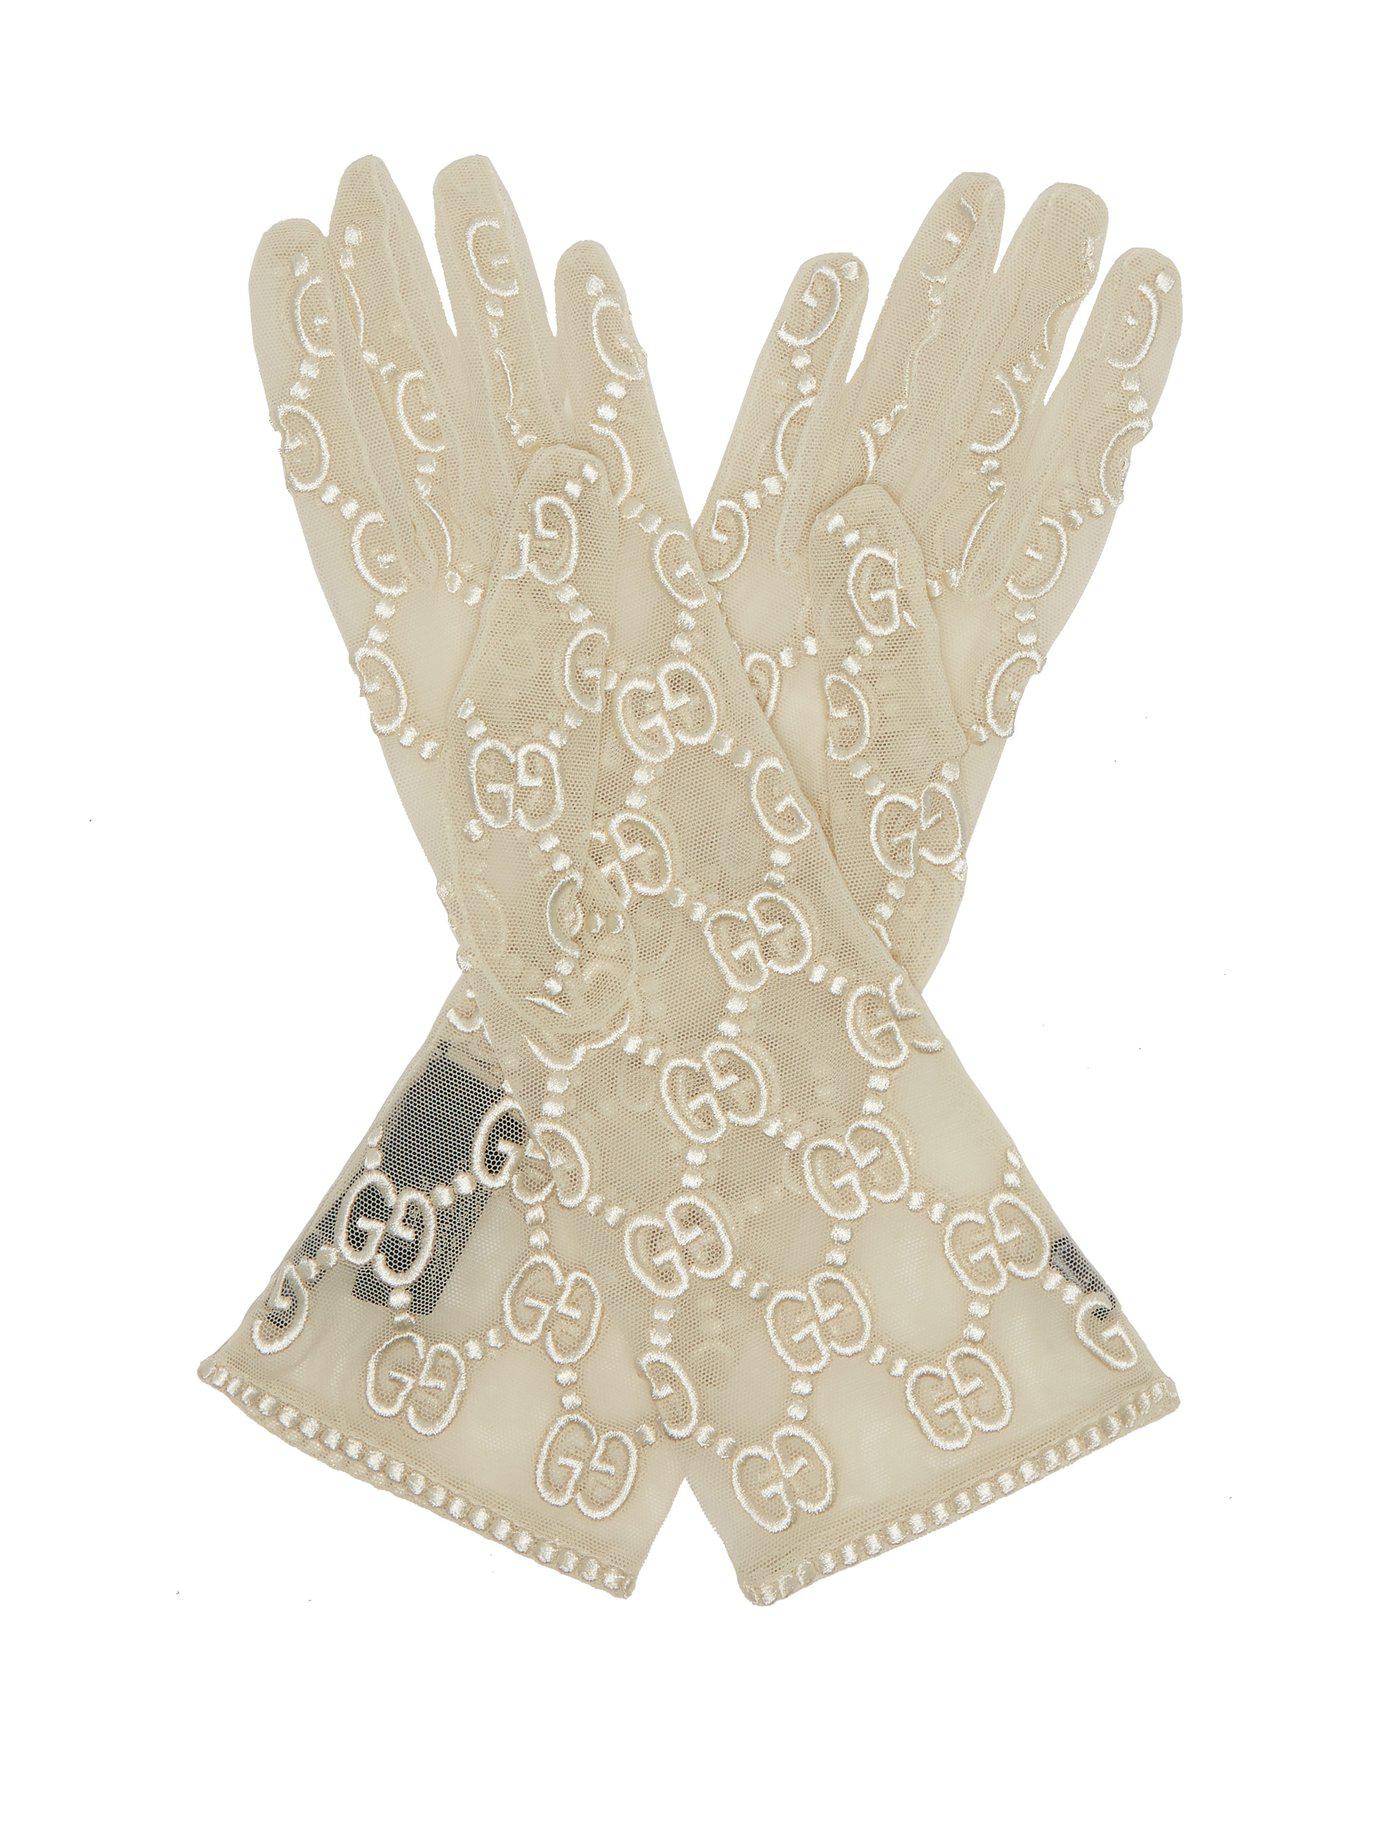 Gucci Gg Embroidered Lace Gloves in White - Lyst